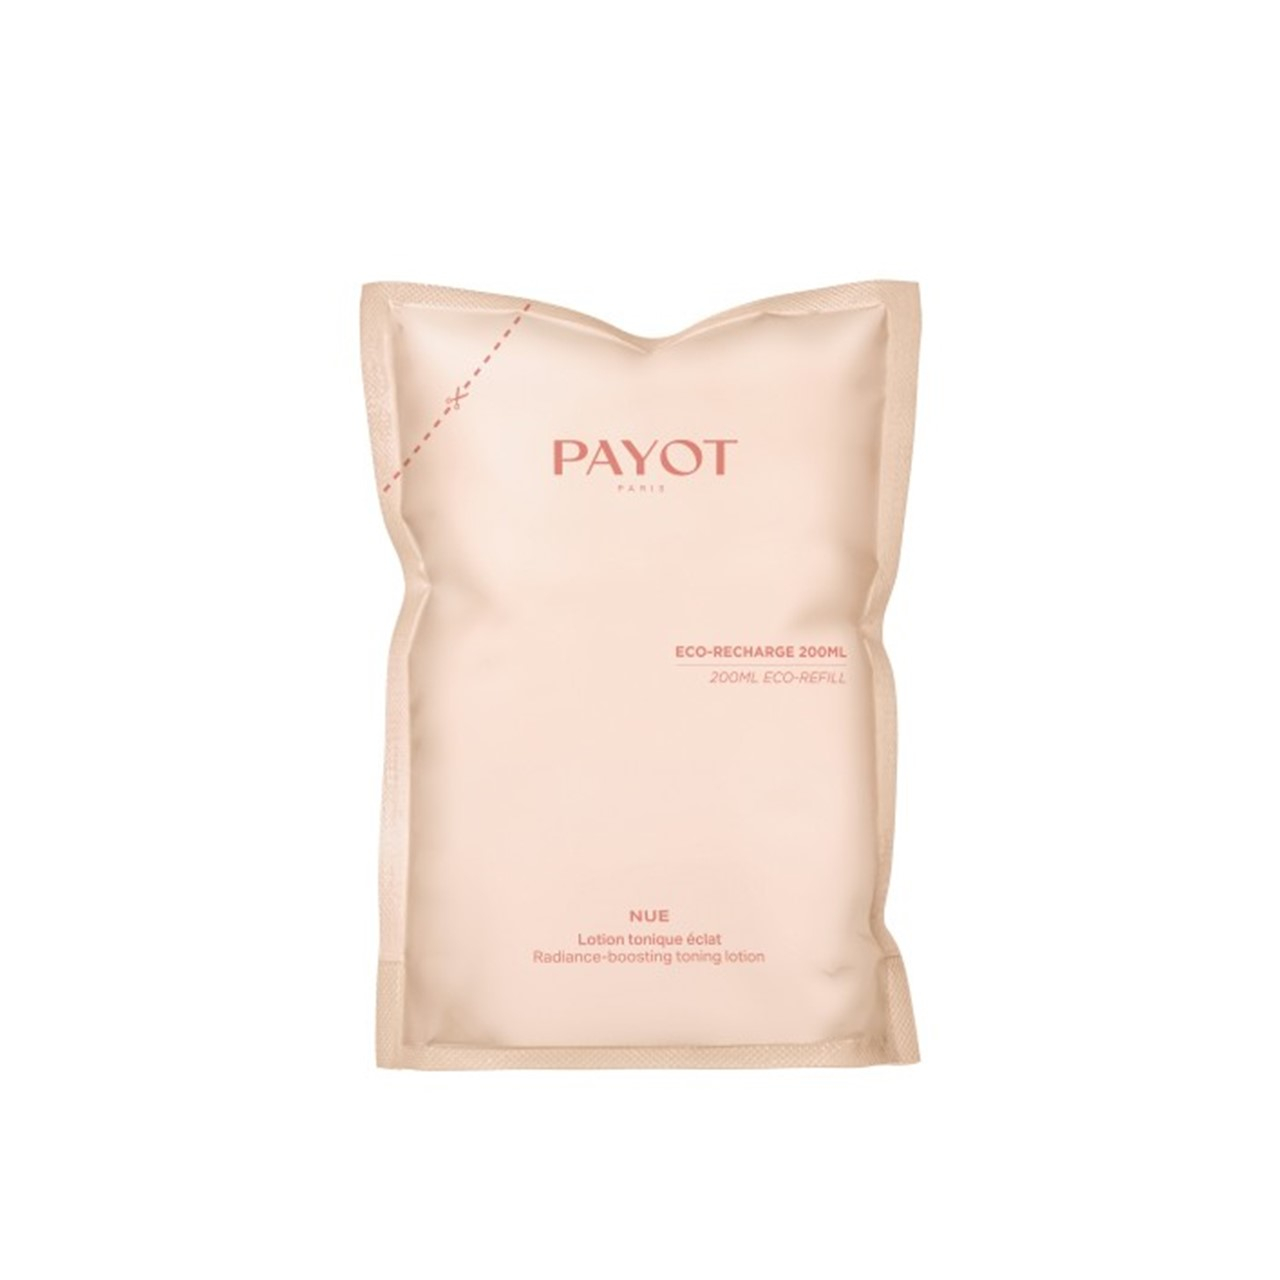 Payot Nue Radiance-Boosting Toning Lotion Eco-Refill 200ml